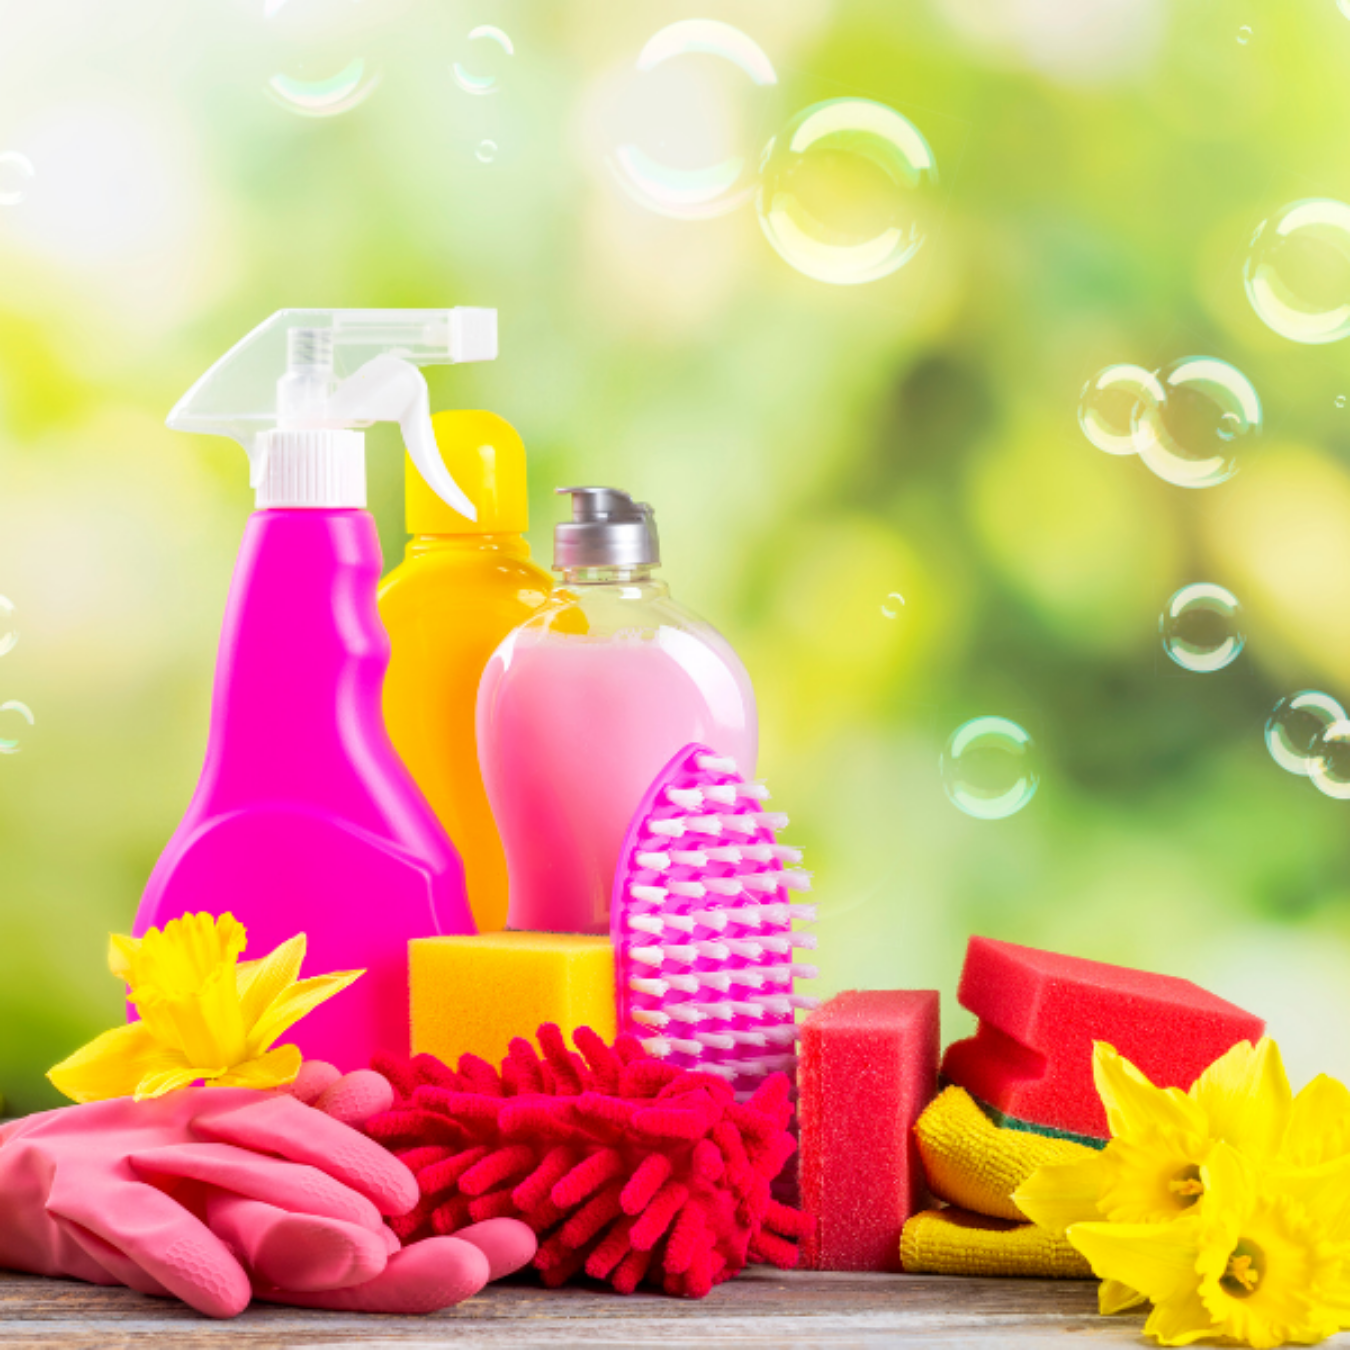 Top 10 Spring Cleaning Tips